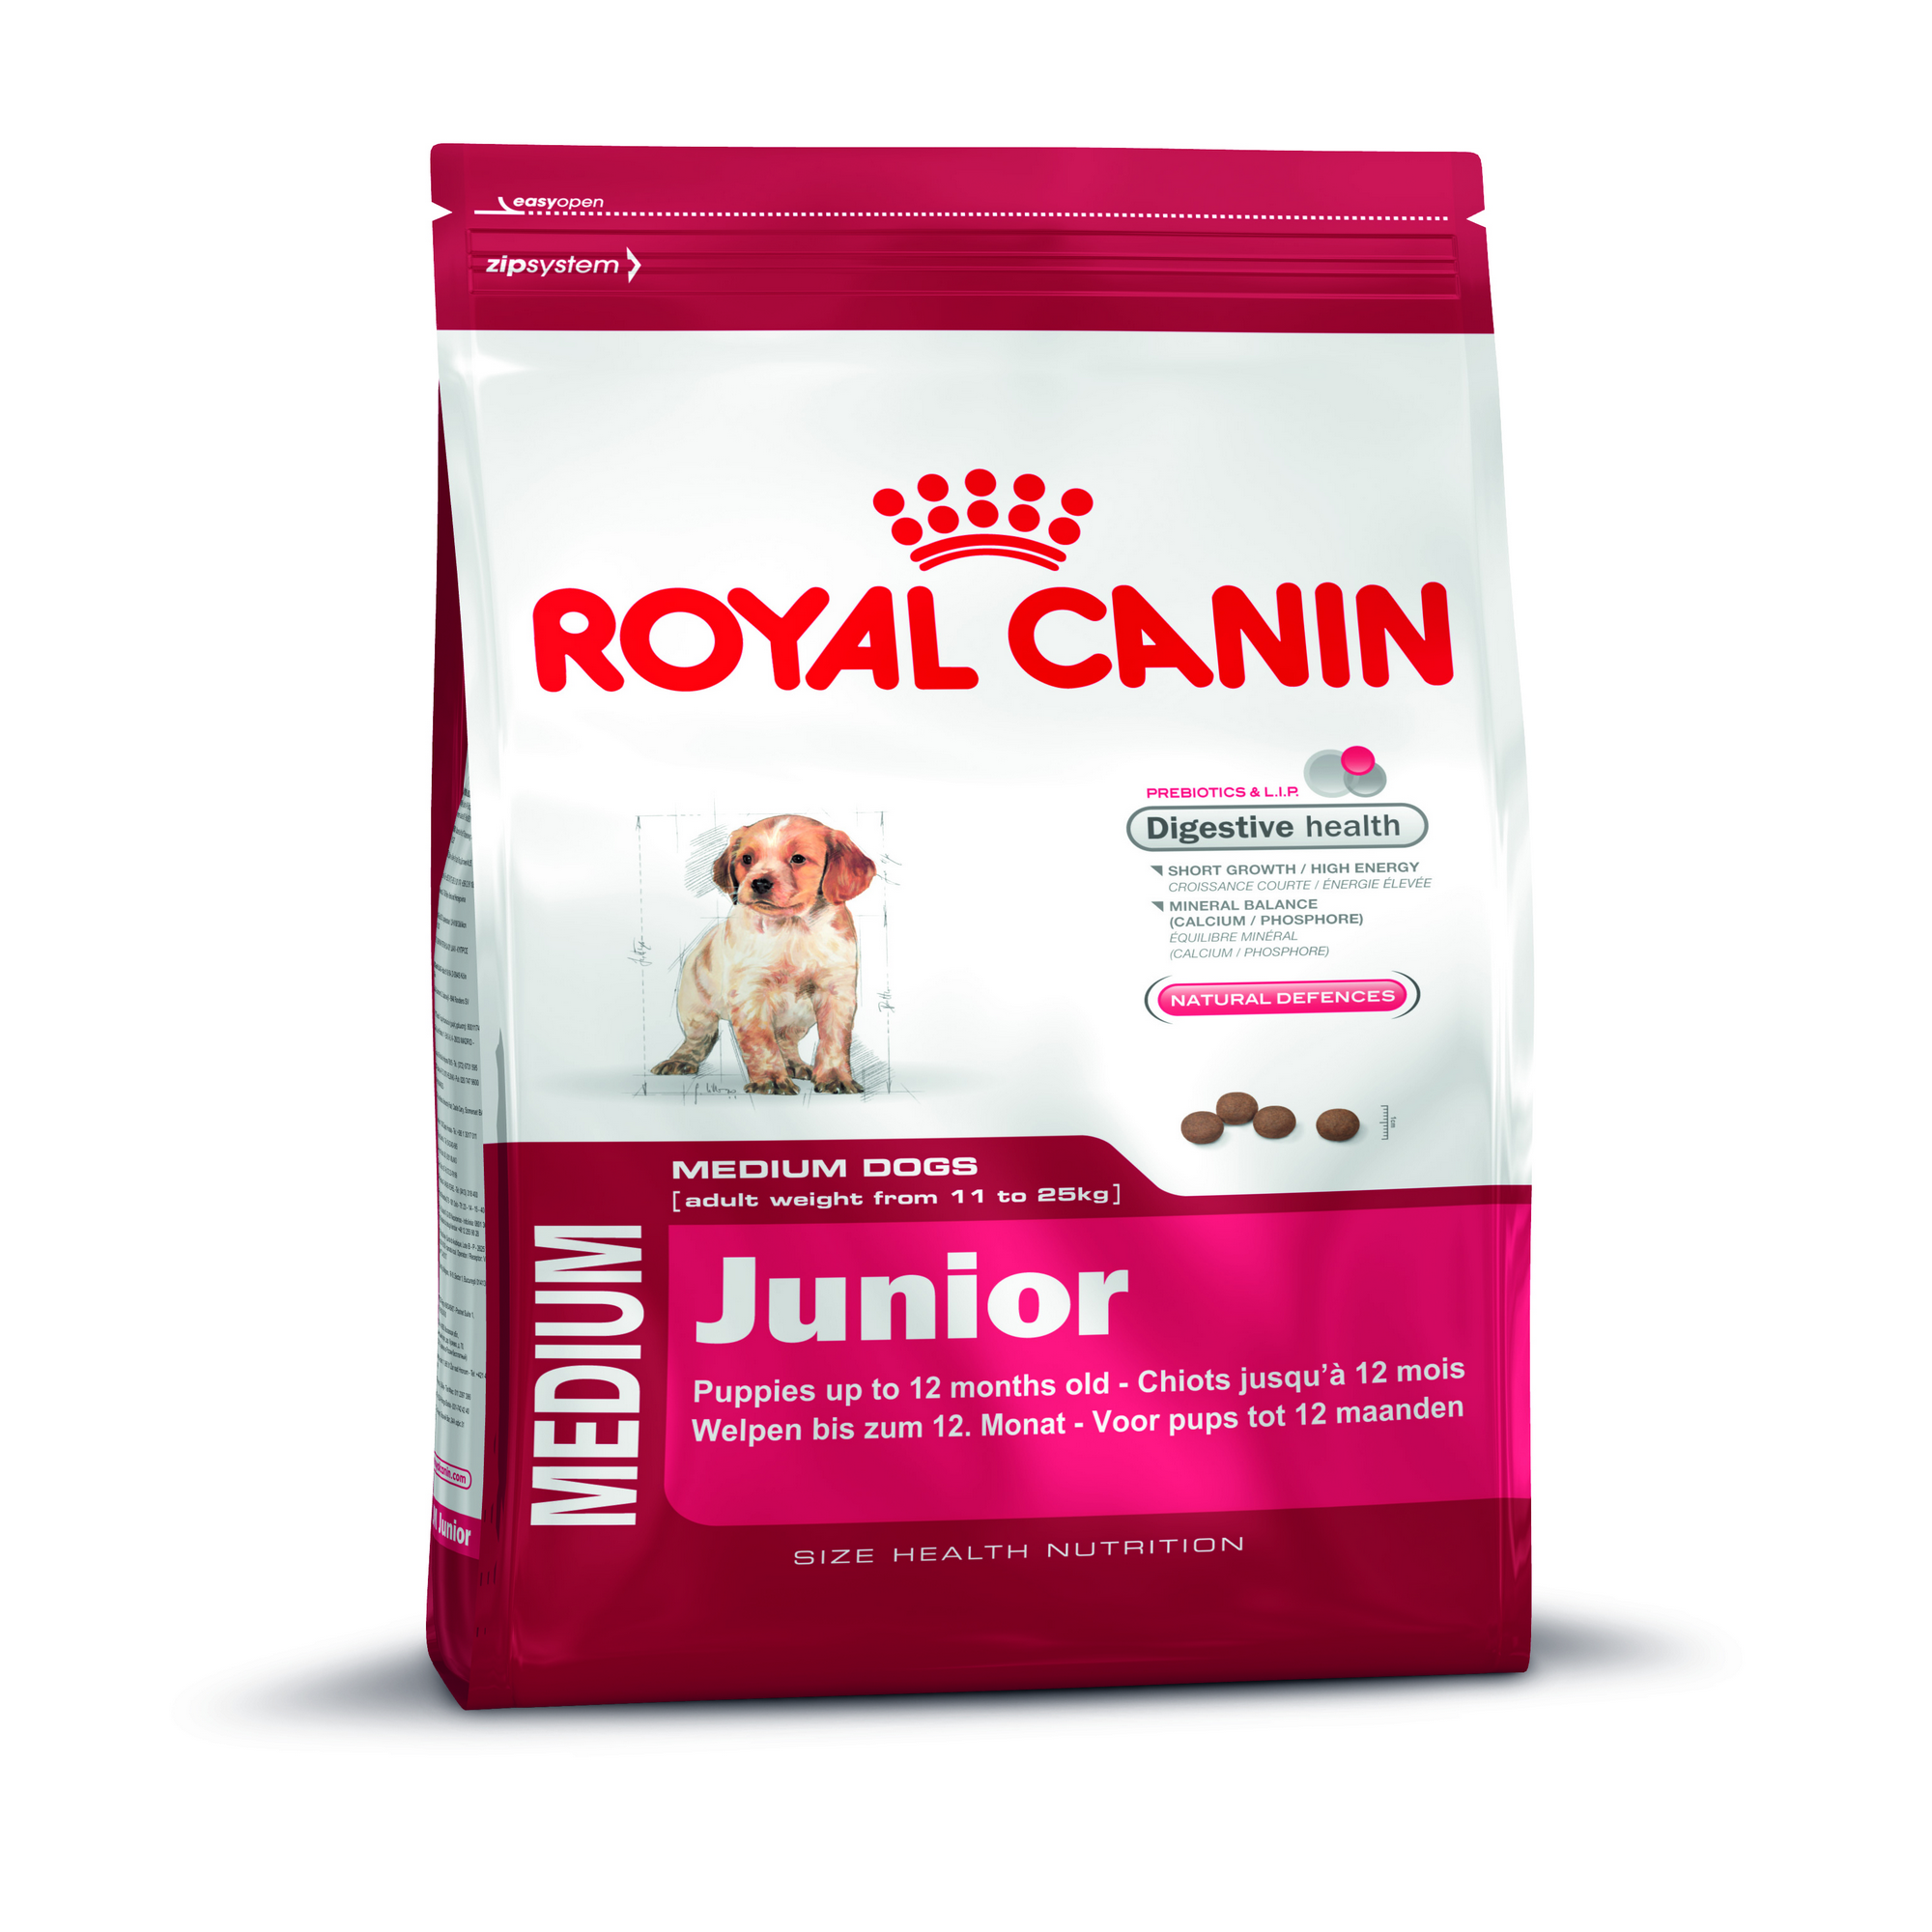 Royal Canin MEDIUM Junior 15 Kg + product picture